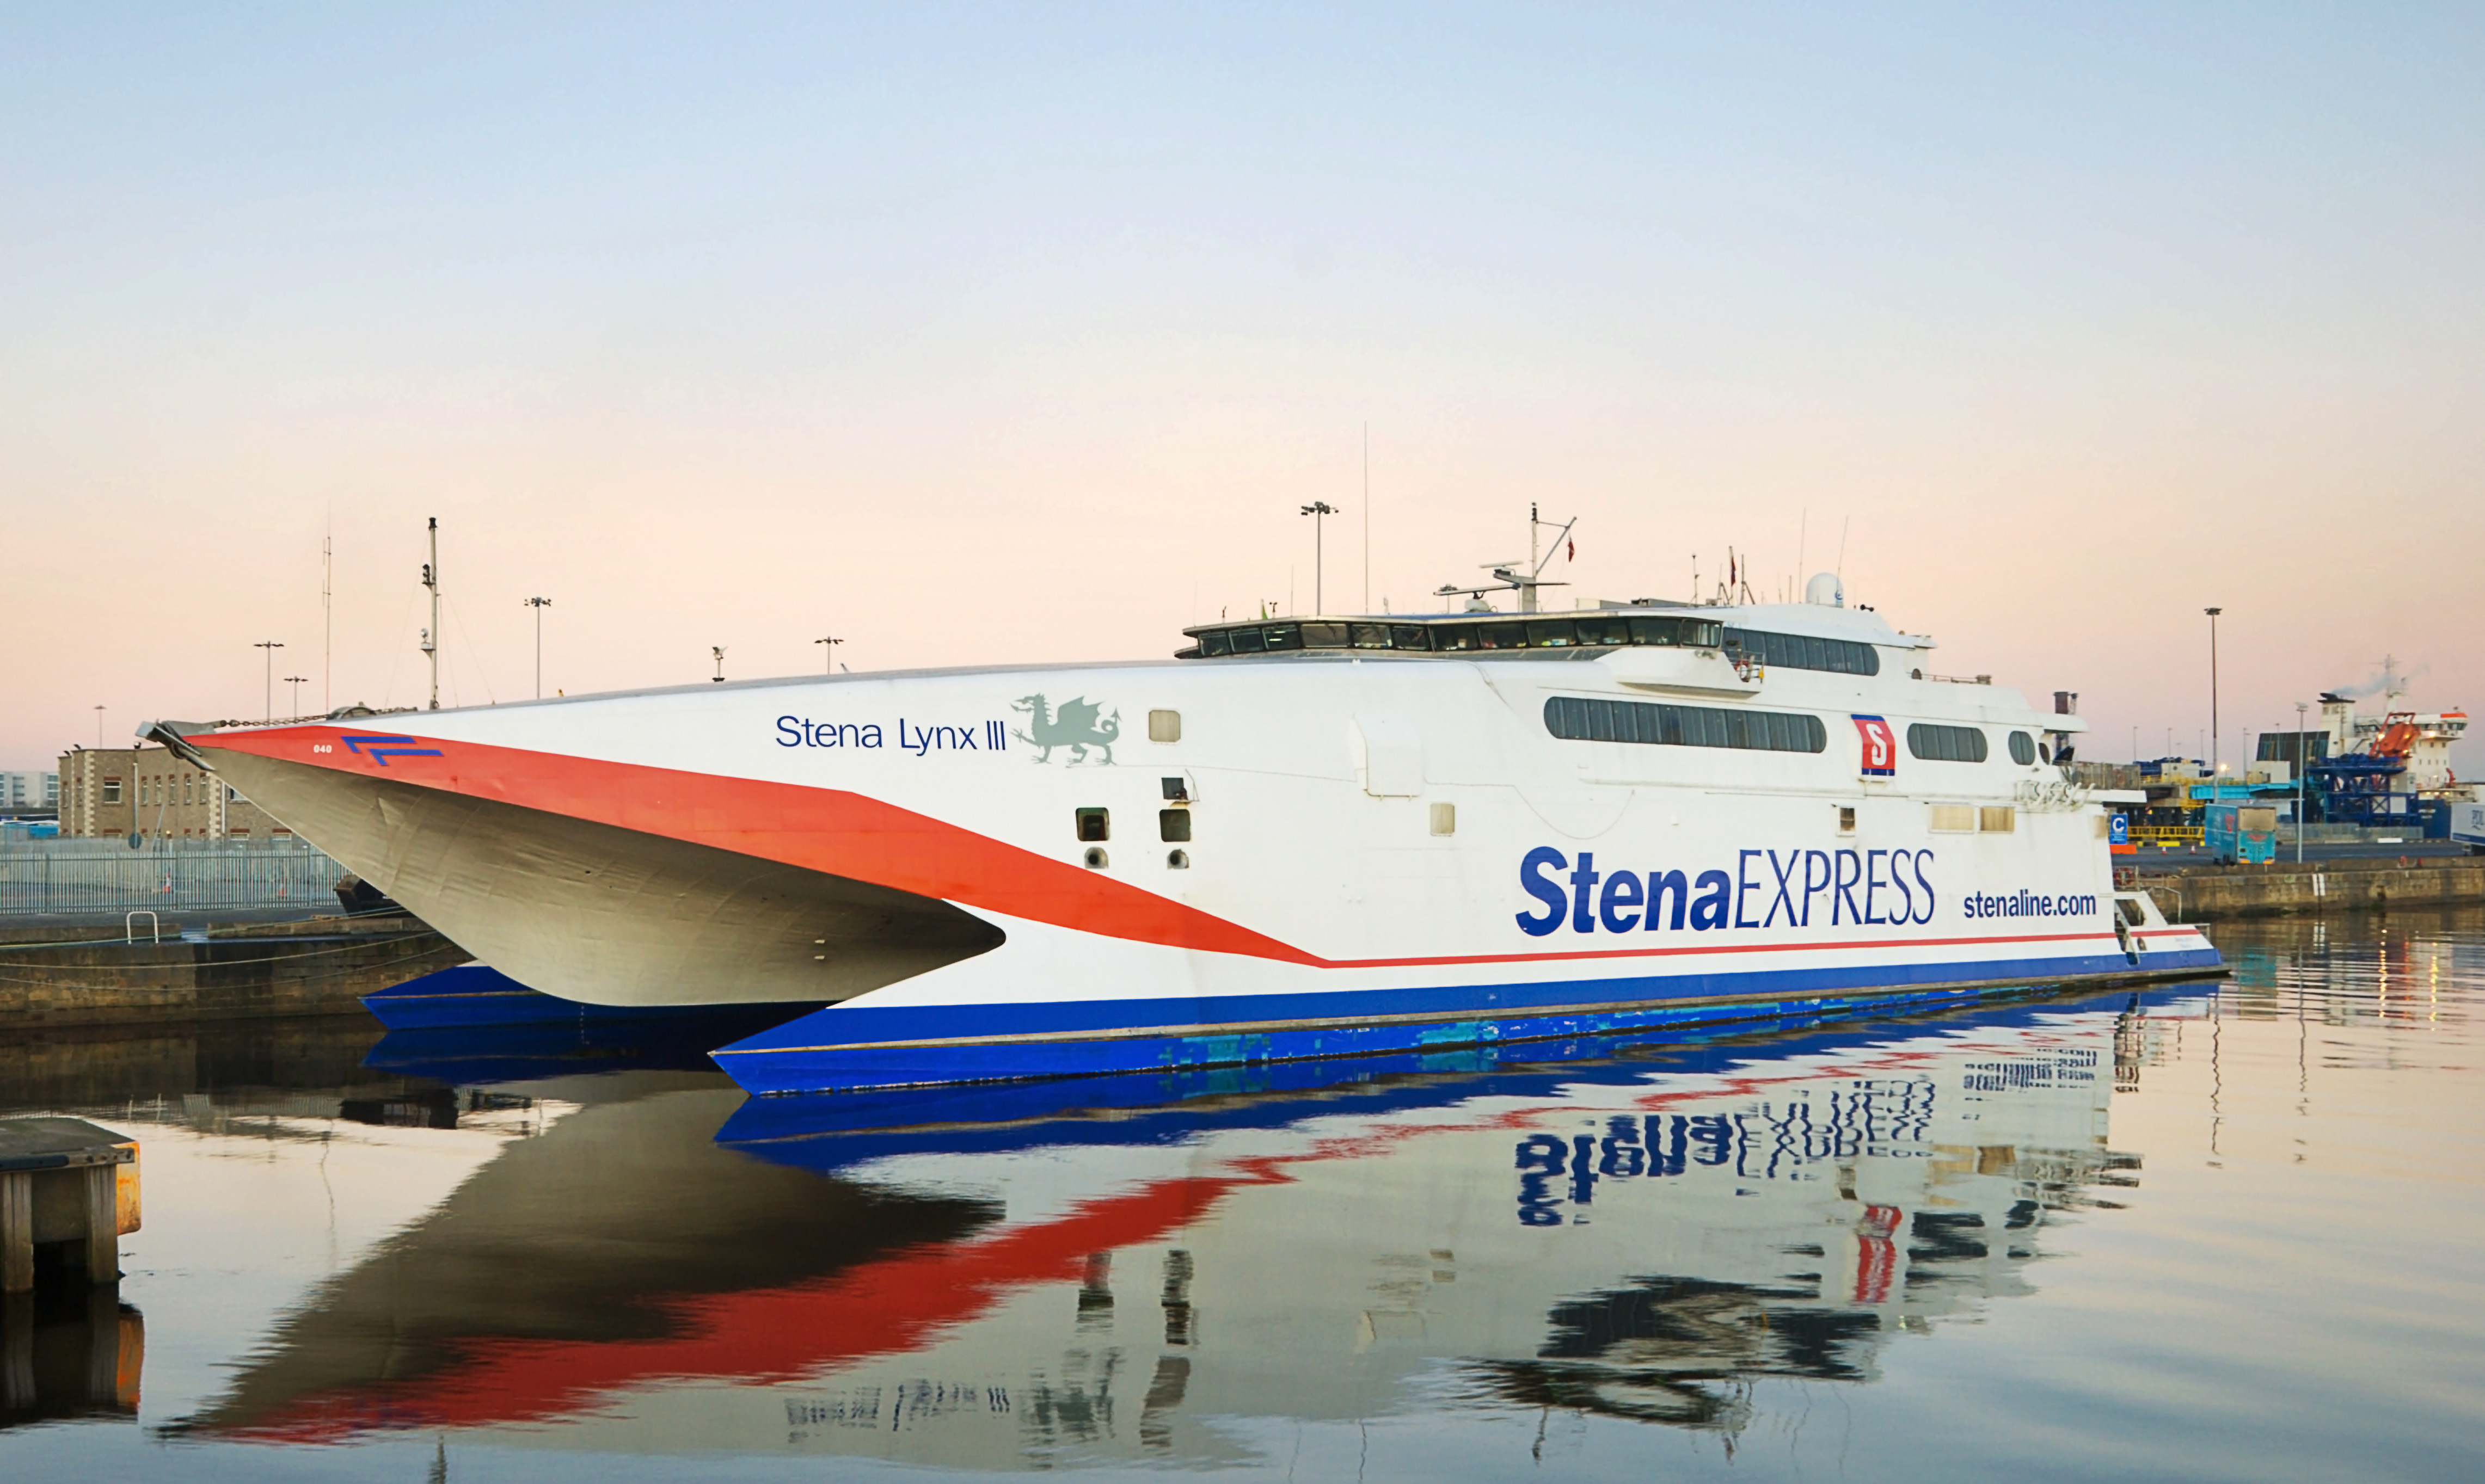 BA850D The Stena Lynx III moored at Dublin Docks. Image shot 12/2008. Exact date unknown.